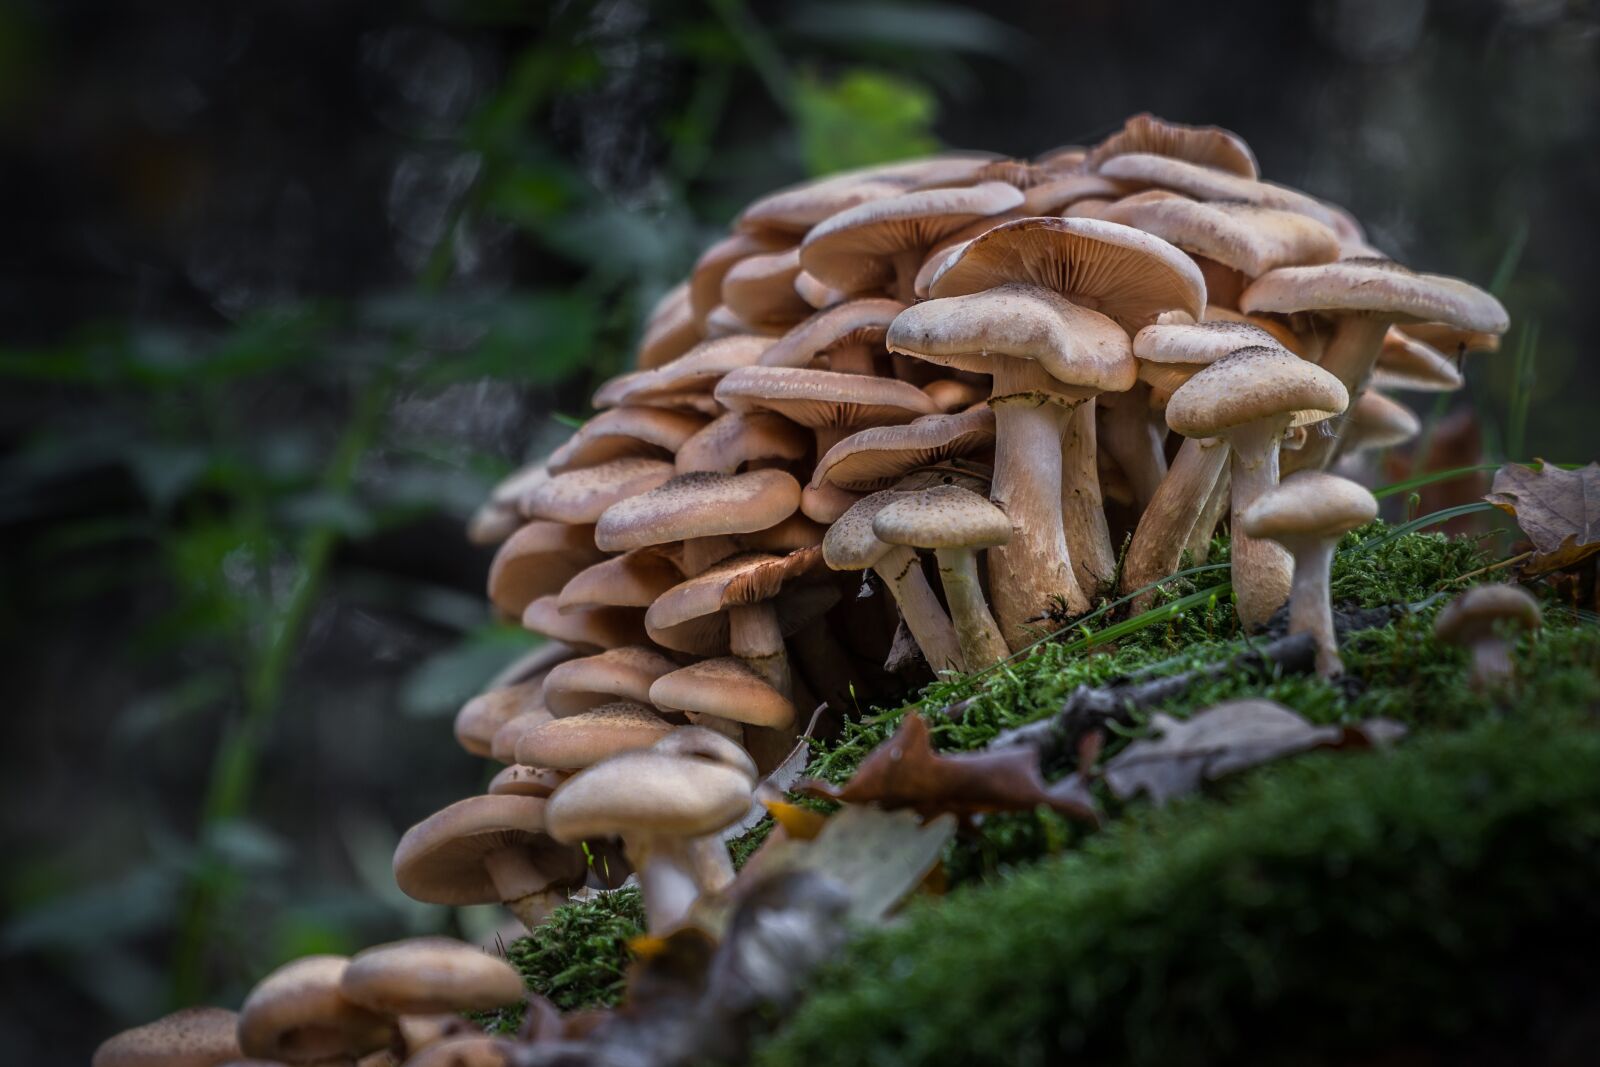 Sony a6300 sample photo. Forest, mushrooms, litter photography